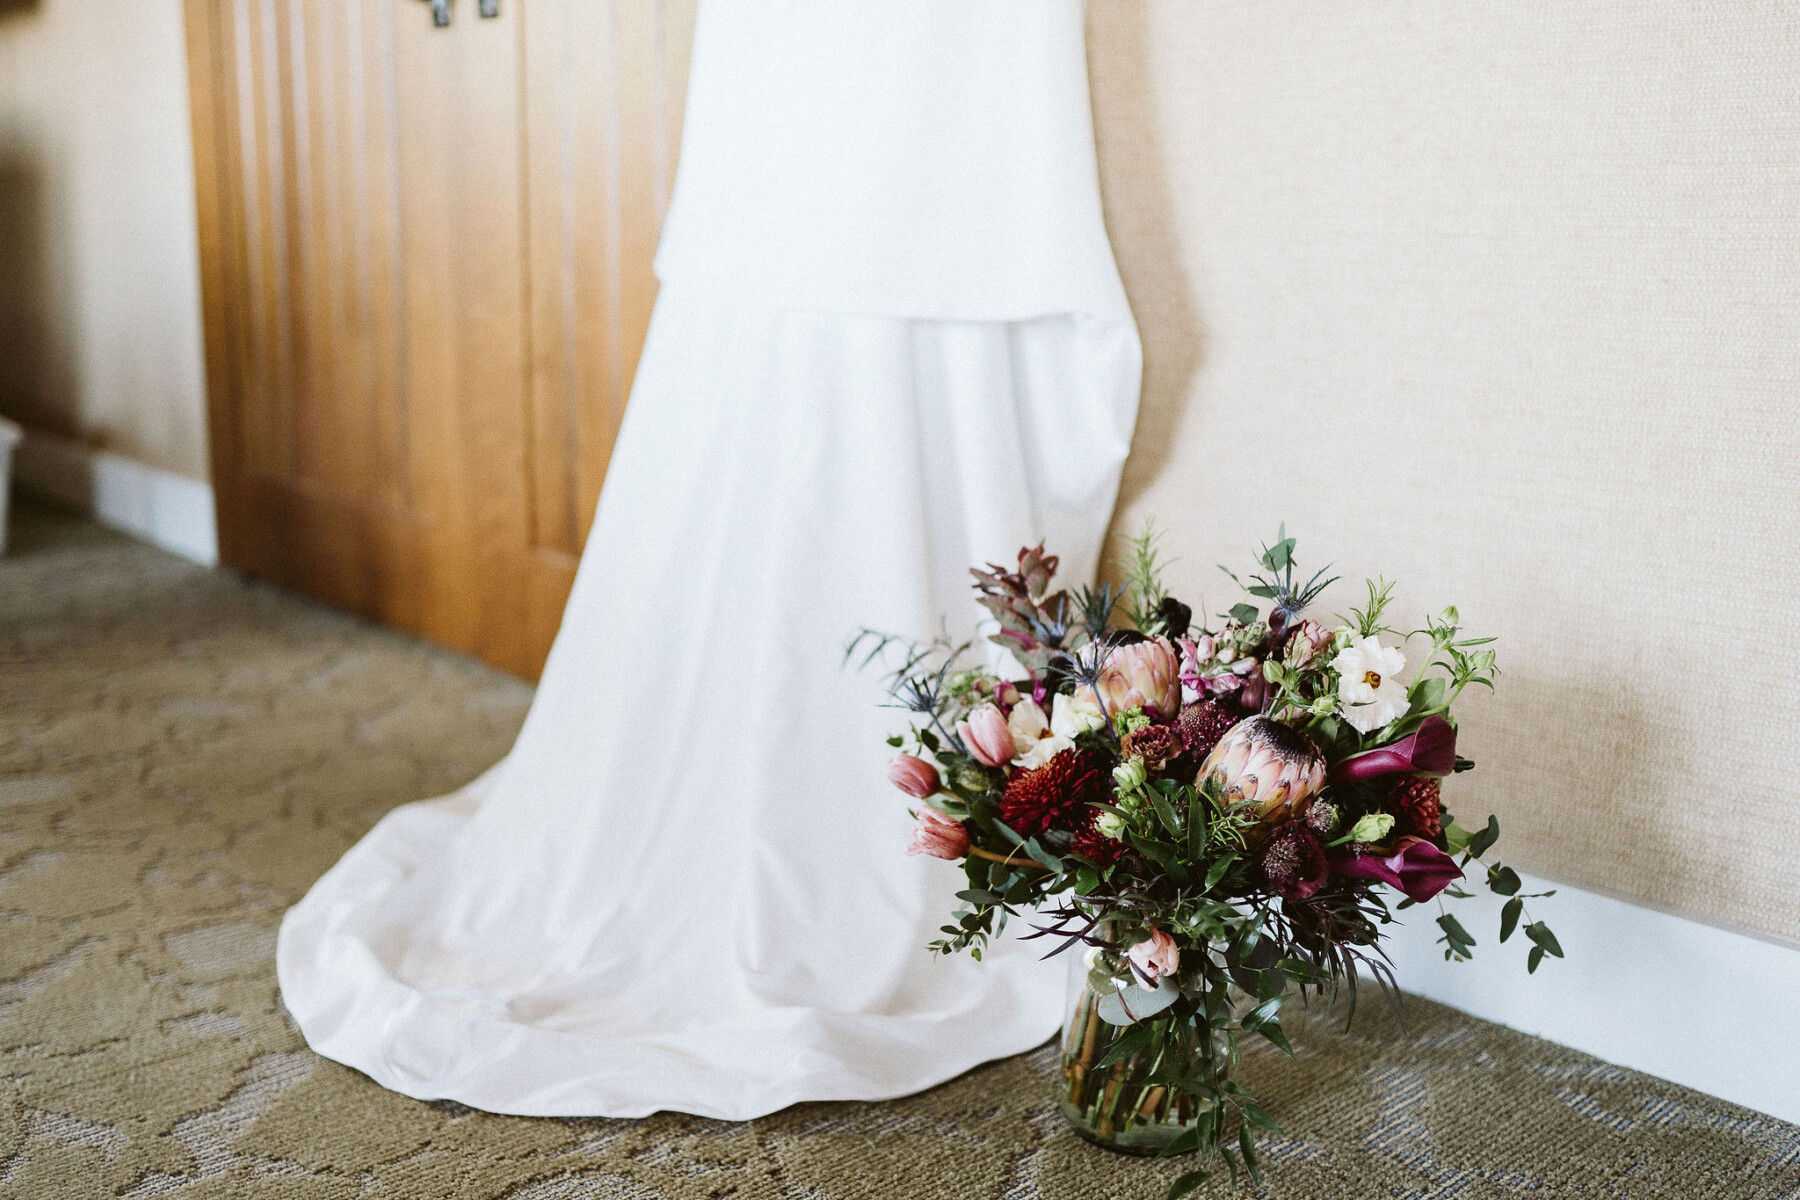 Omni Grove Park Inn Wedding with Couture by Tess Giovanna Alessandro Wedding Dress by Couture by Tess